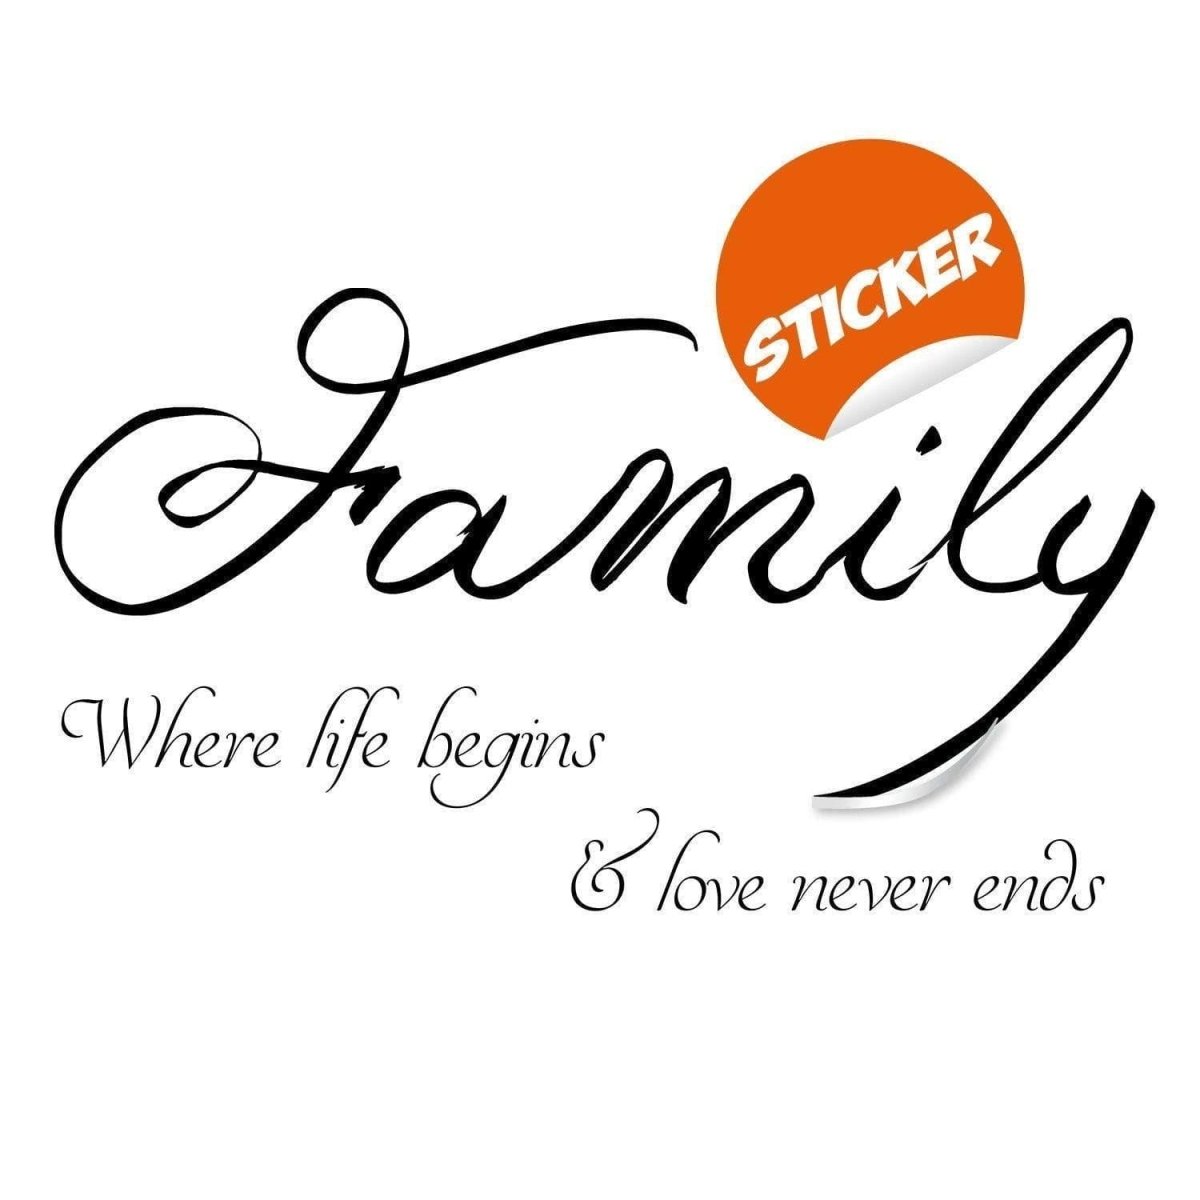 Inspirational Love & Family Wall Decal - Decords